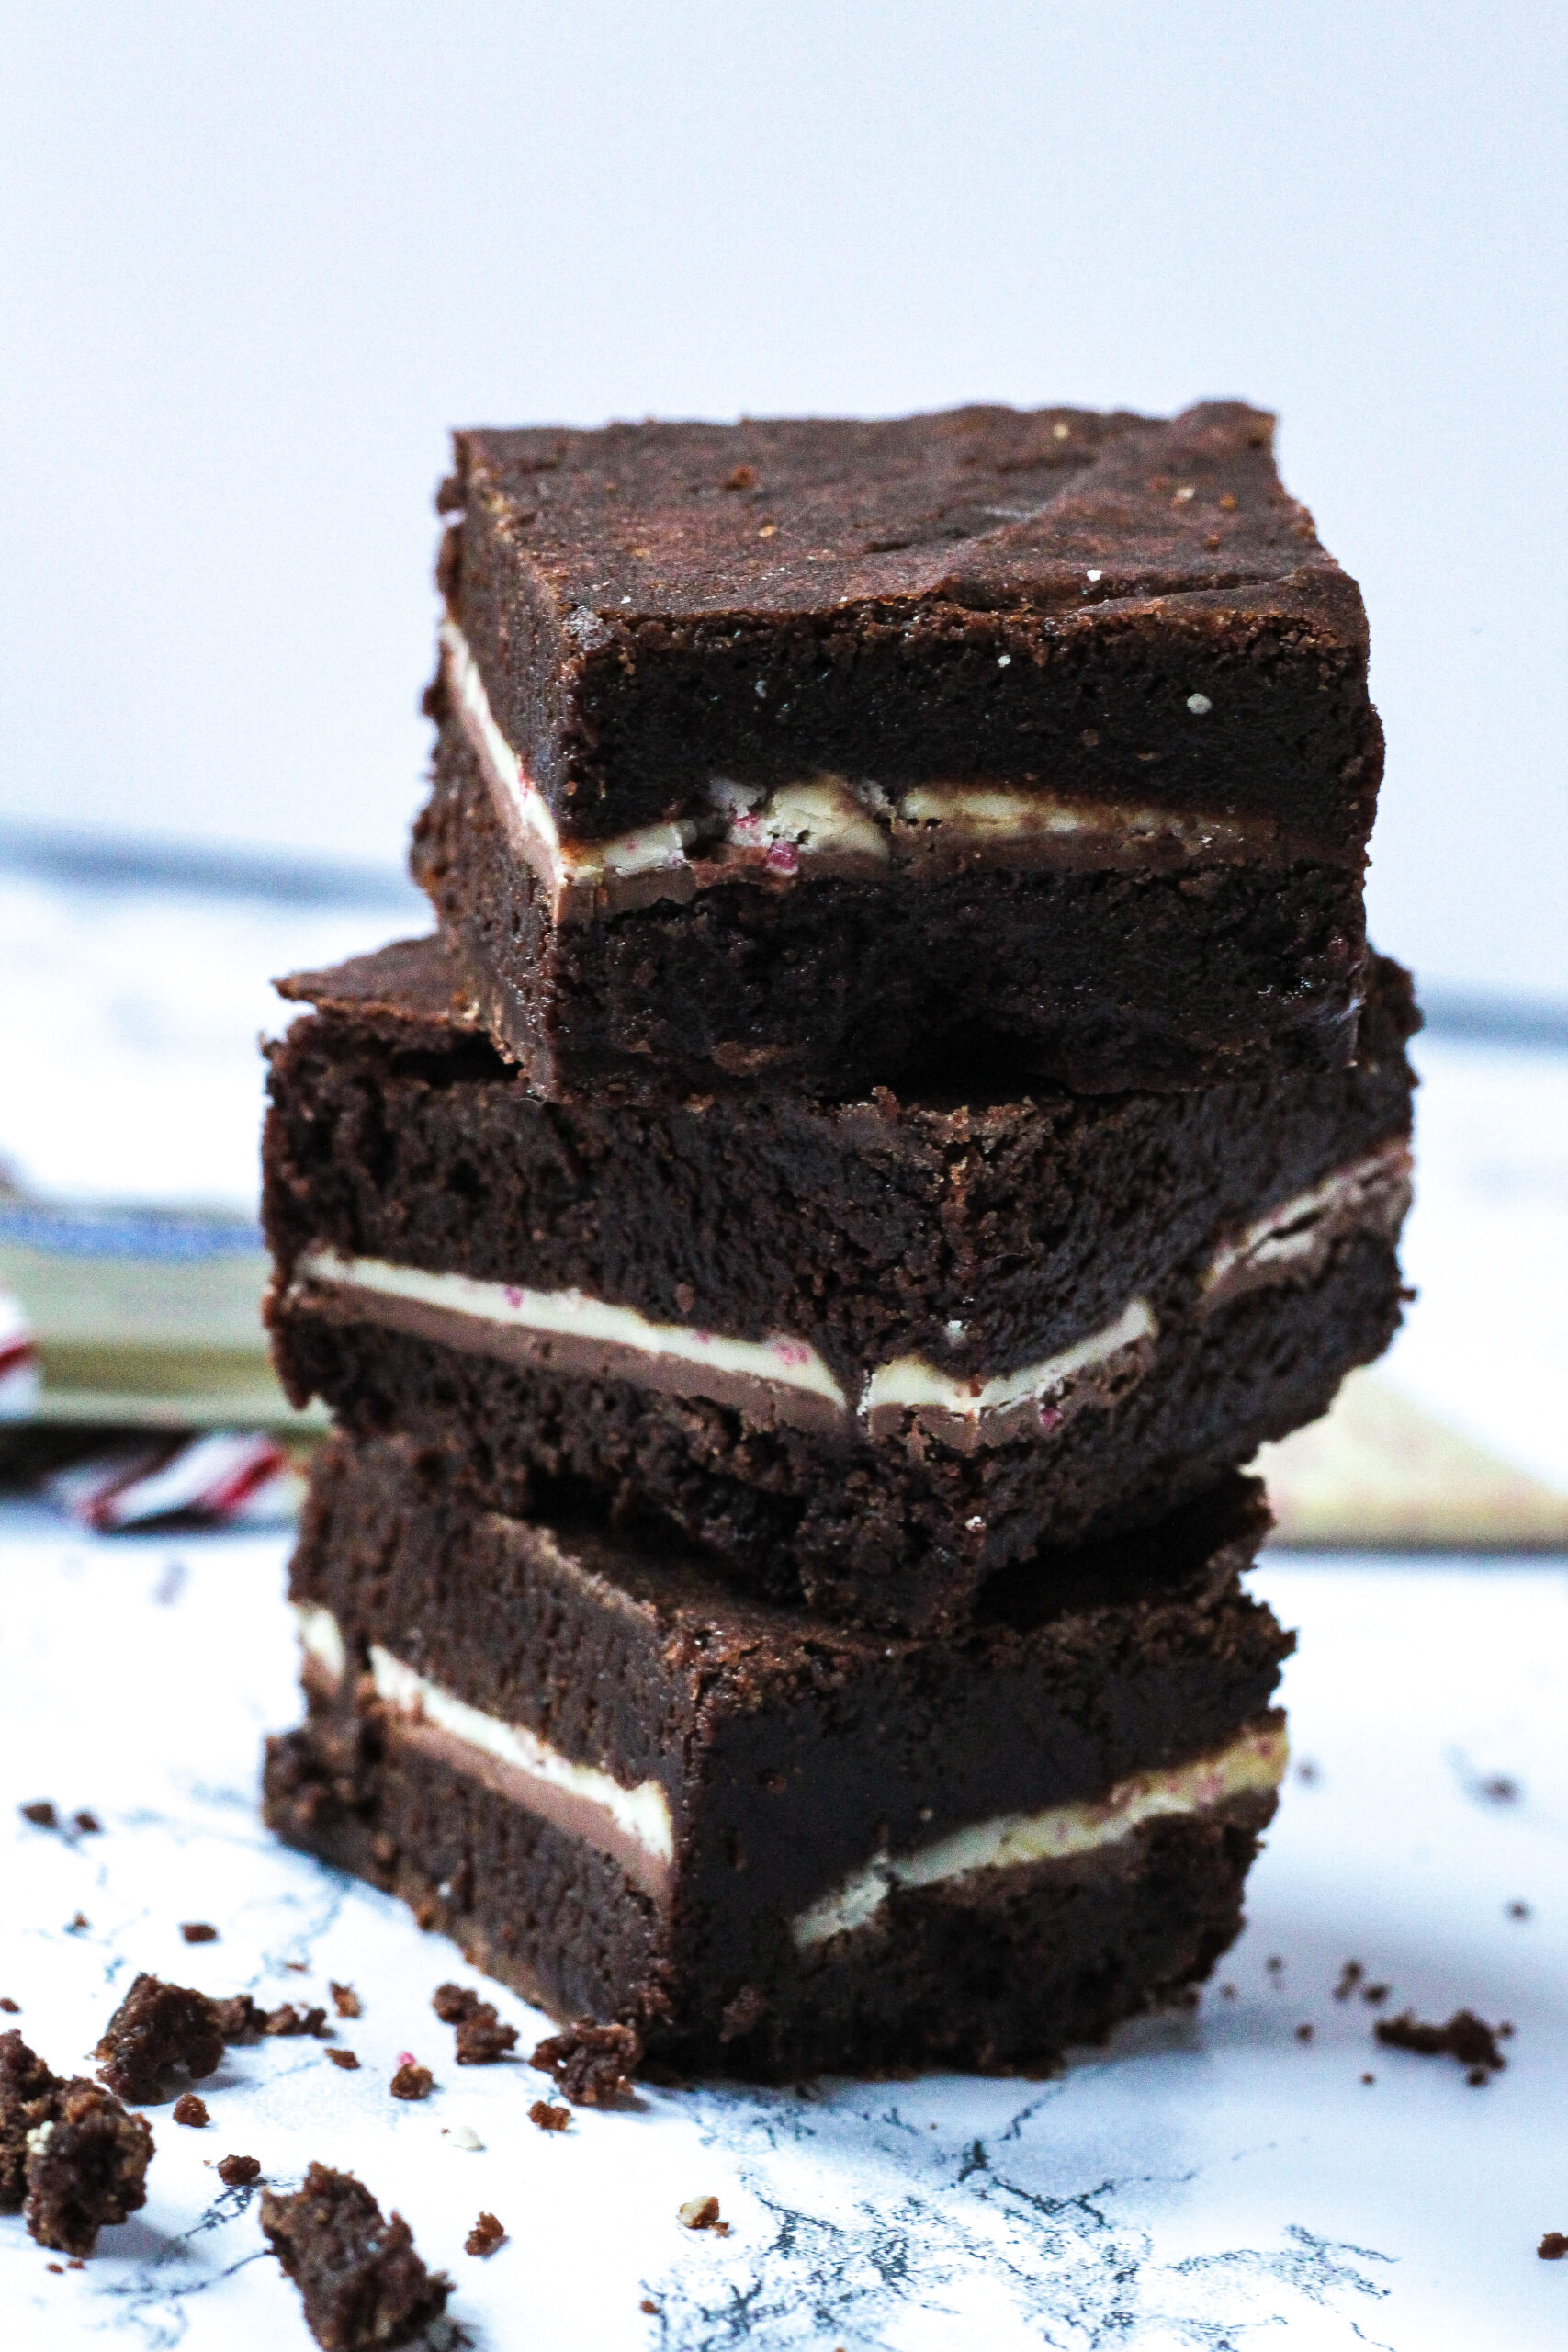 side view of a stack of three peppermint mocha brownies with crumbs on the white marbled surface around the stack. Barely visible behind the stack are some wrapped and unwrapped peppermint bark squares